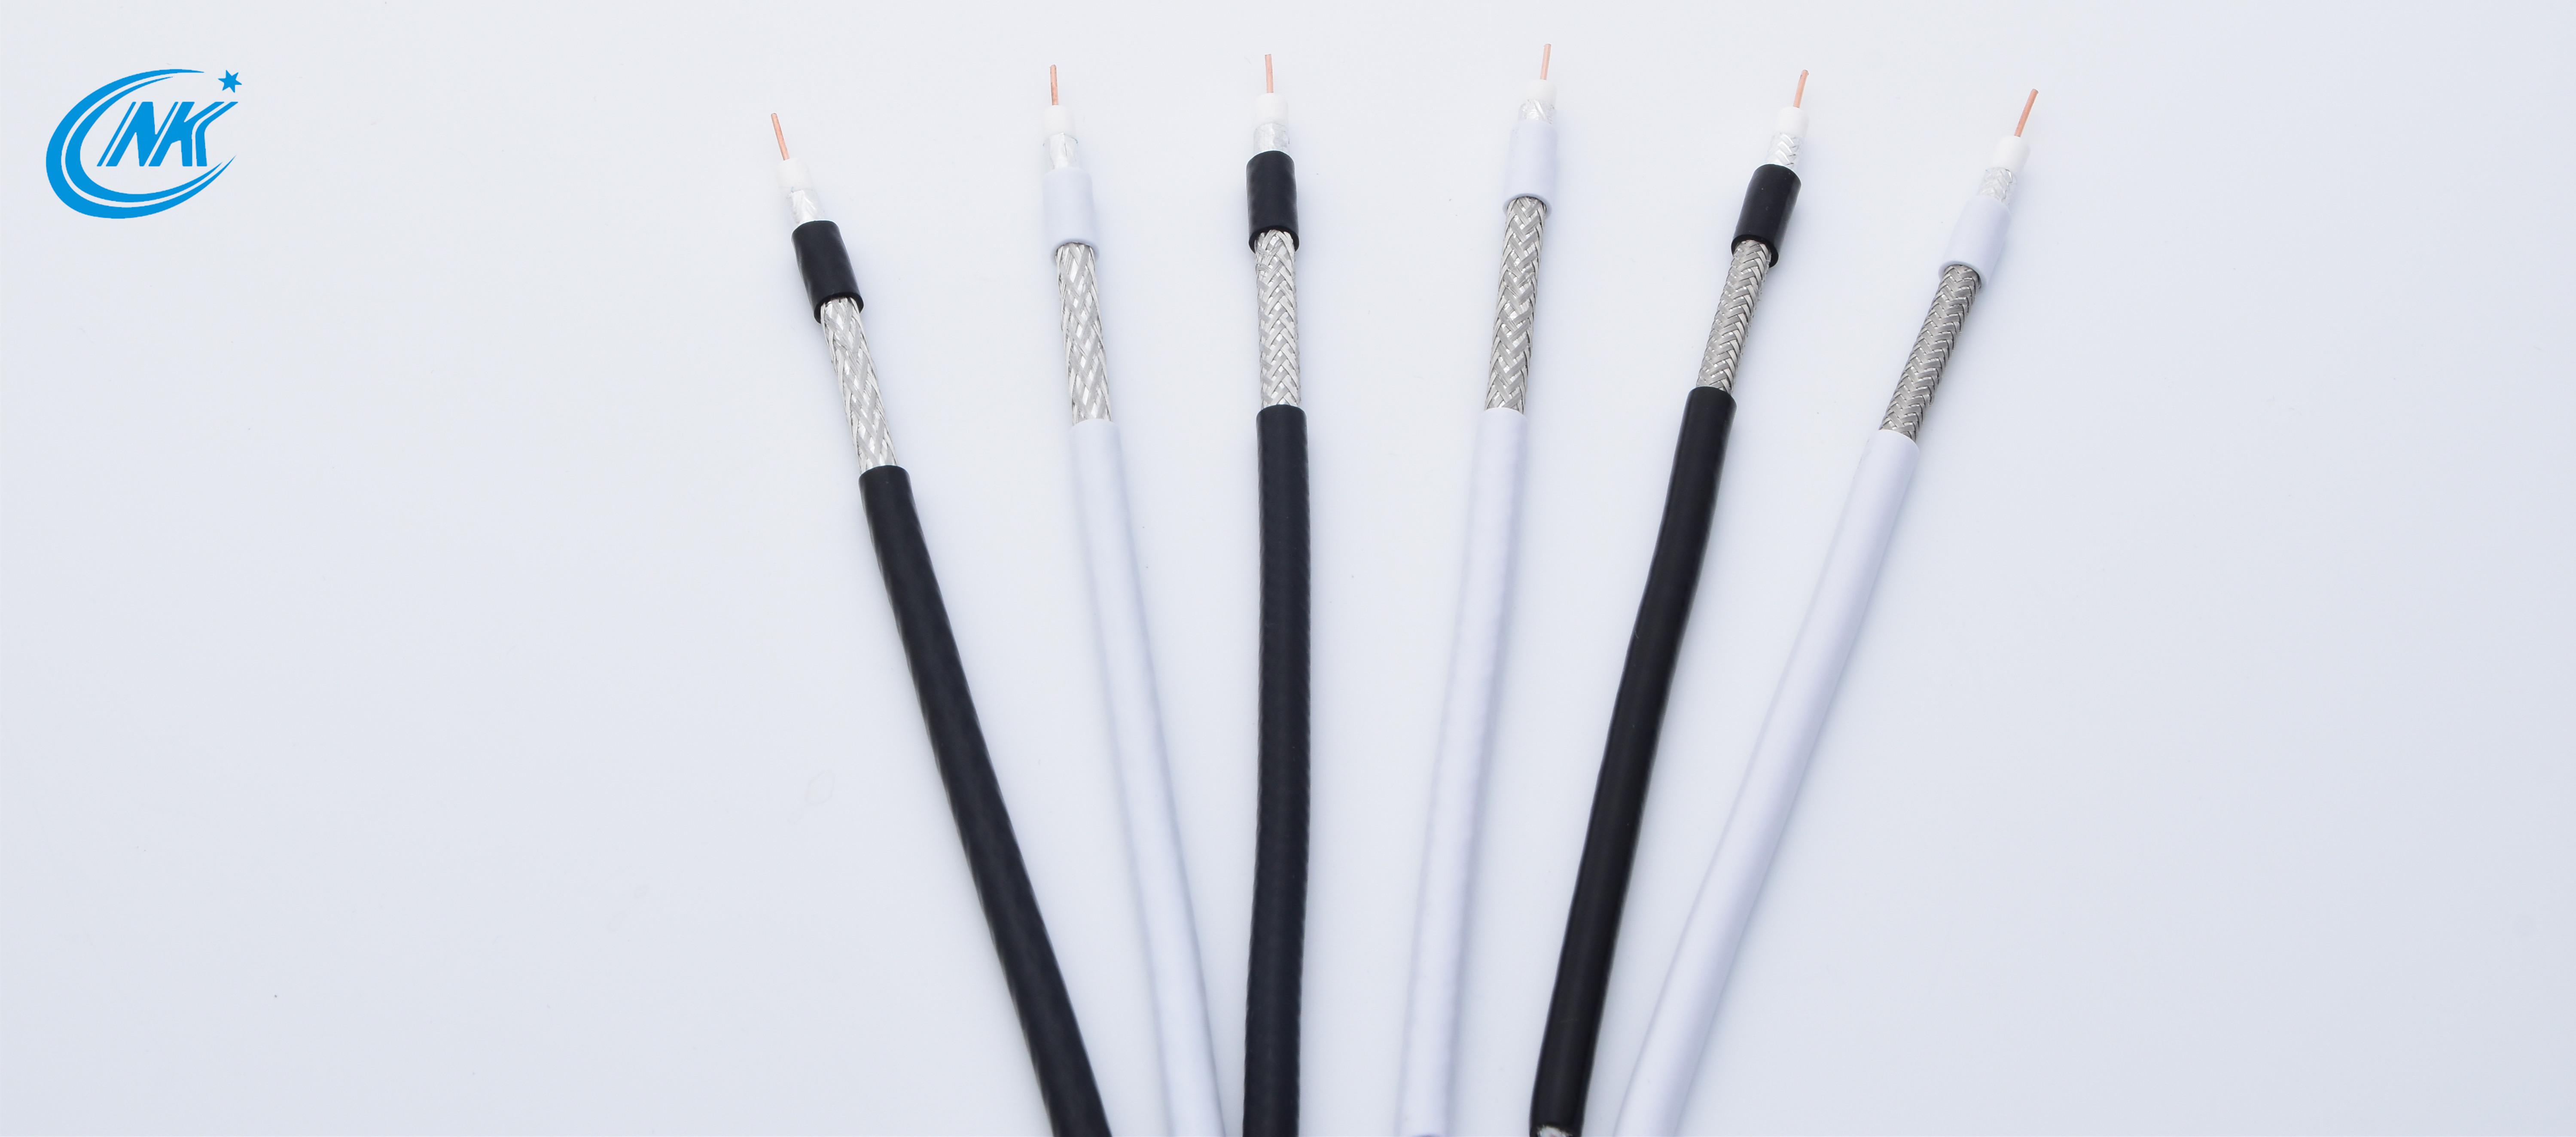 3 Important Uses Of Coaxial Cable